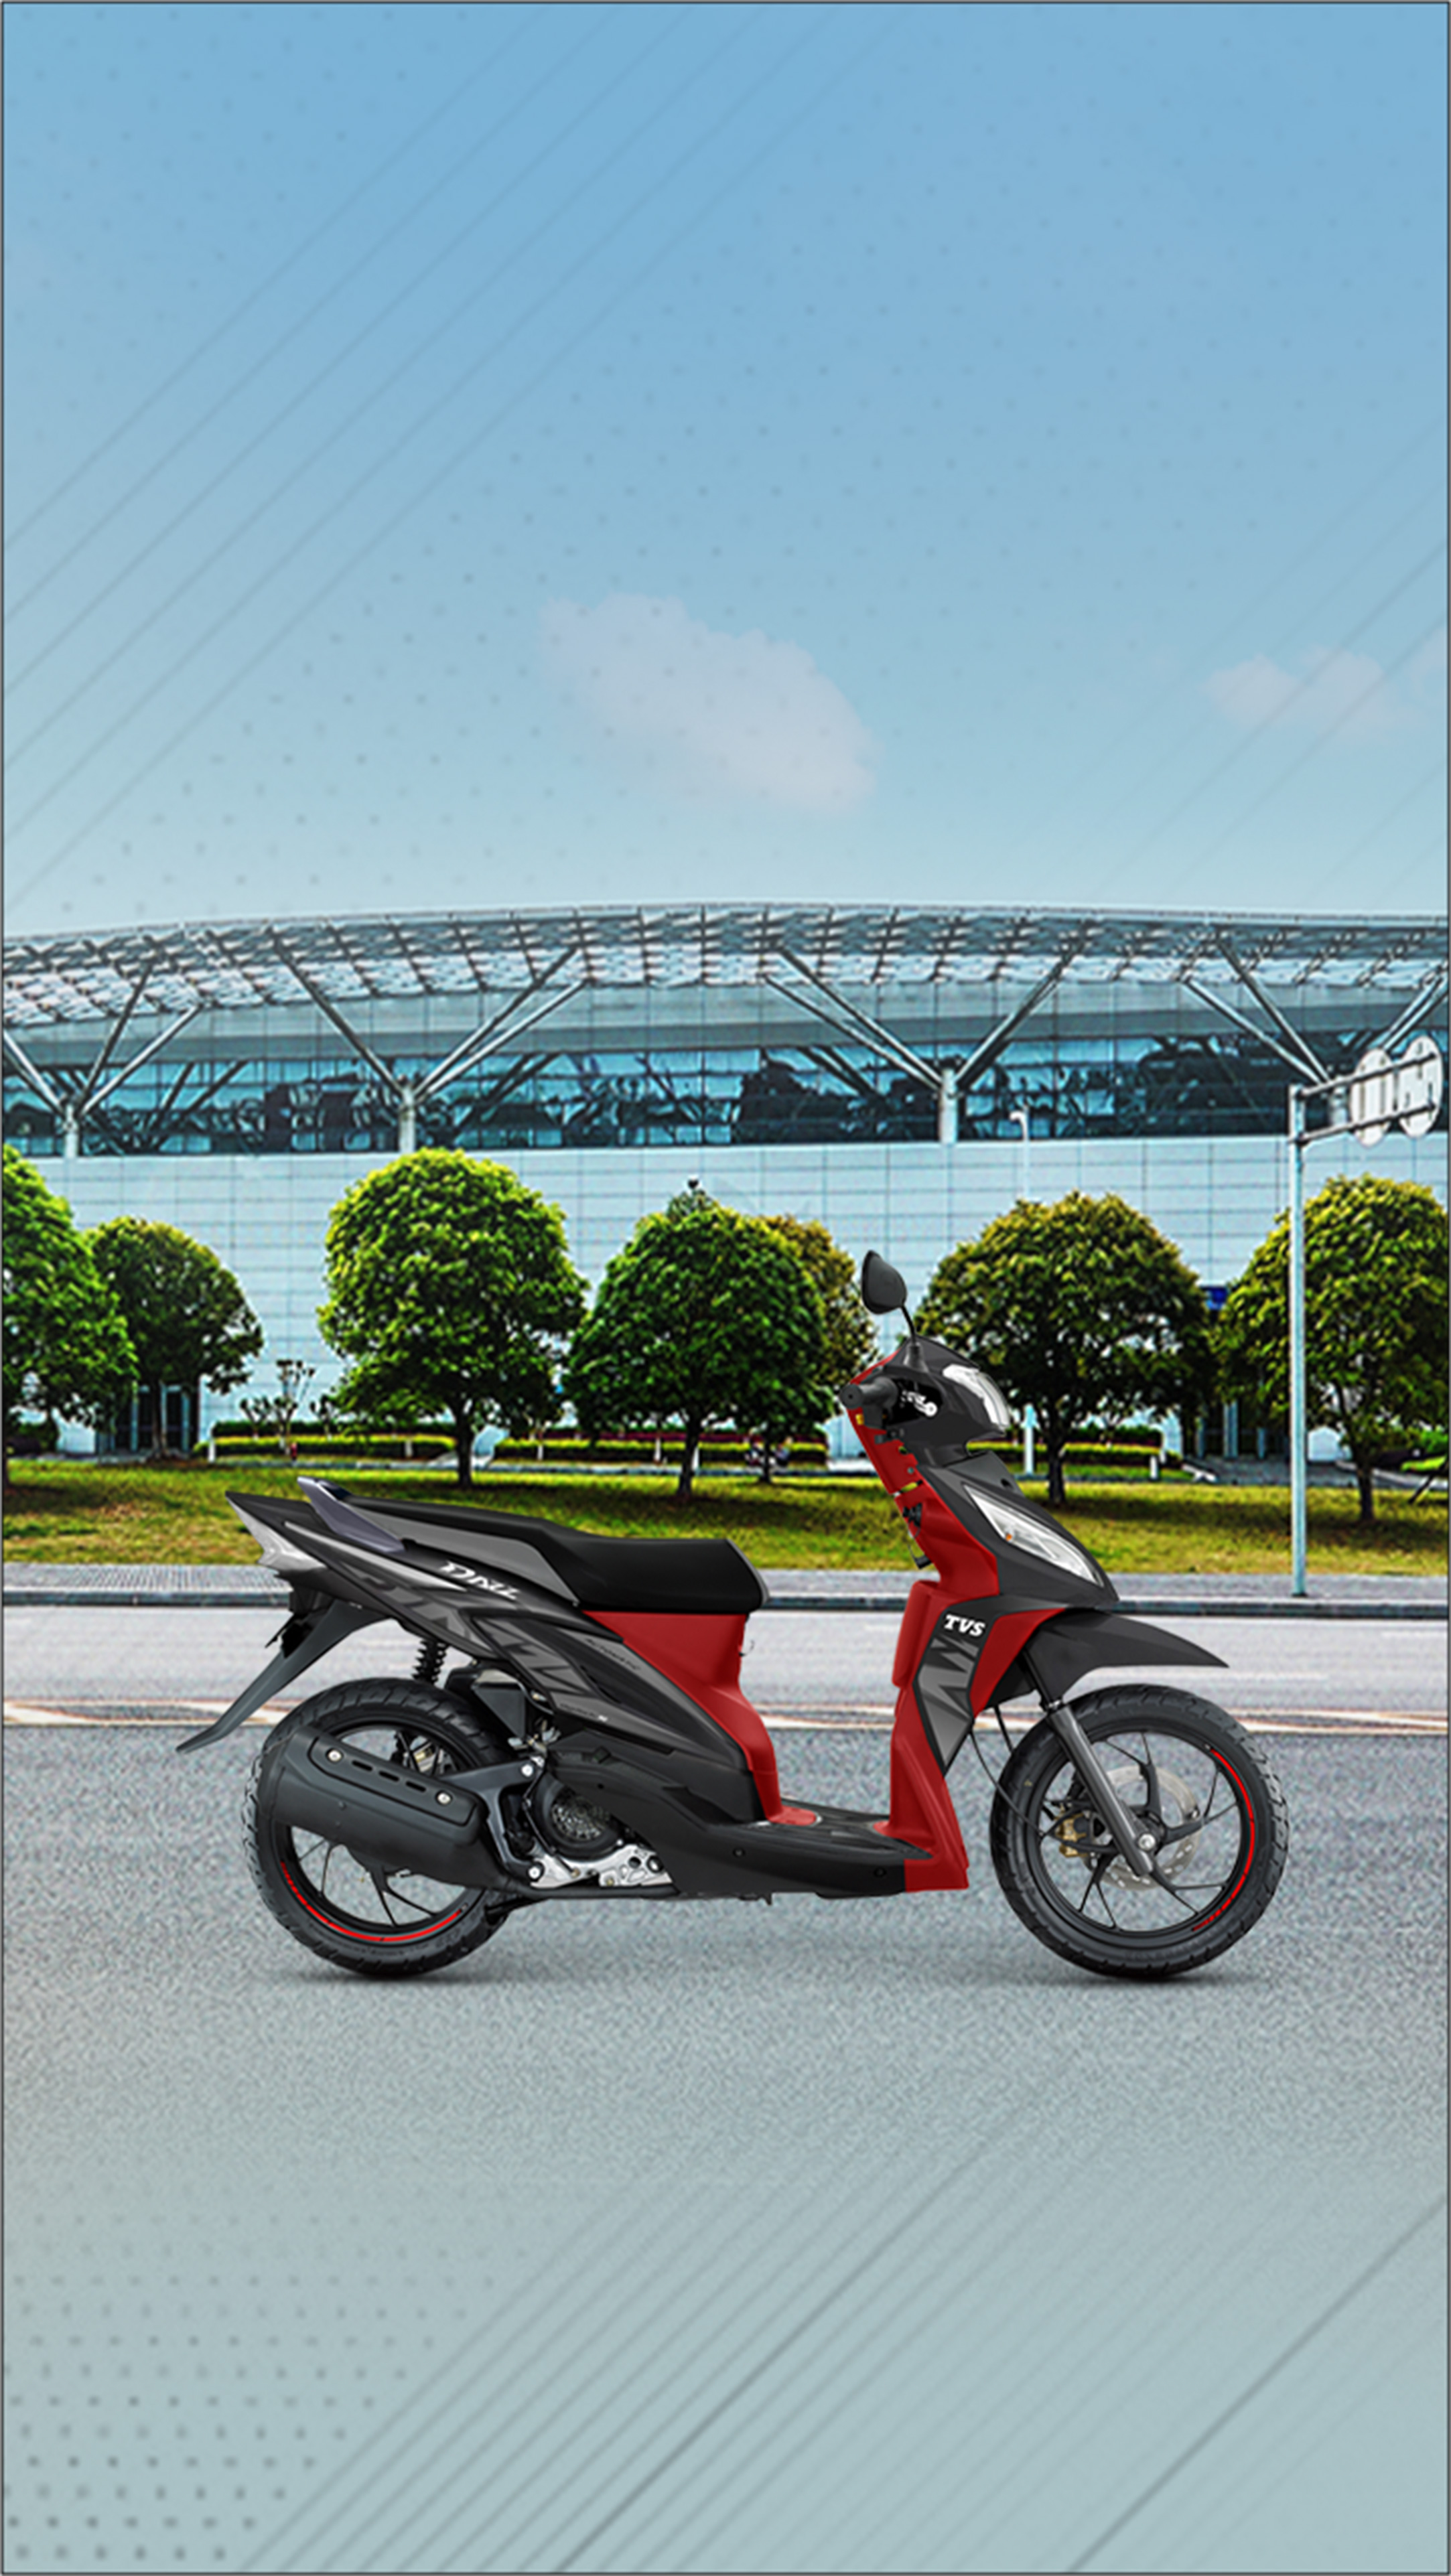 TVS Dazz 110cc scooter is featured in a banner image, showcasing its stylish black and white color